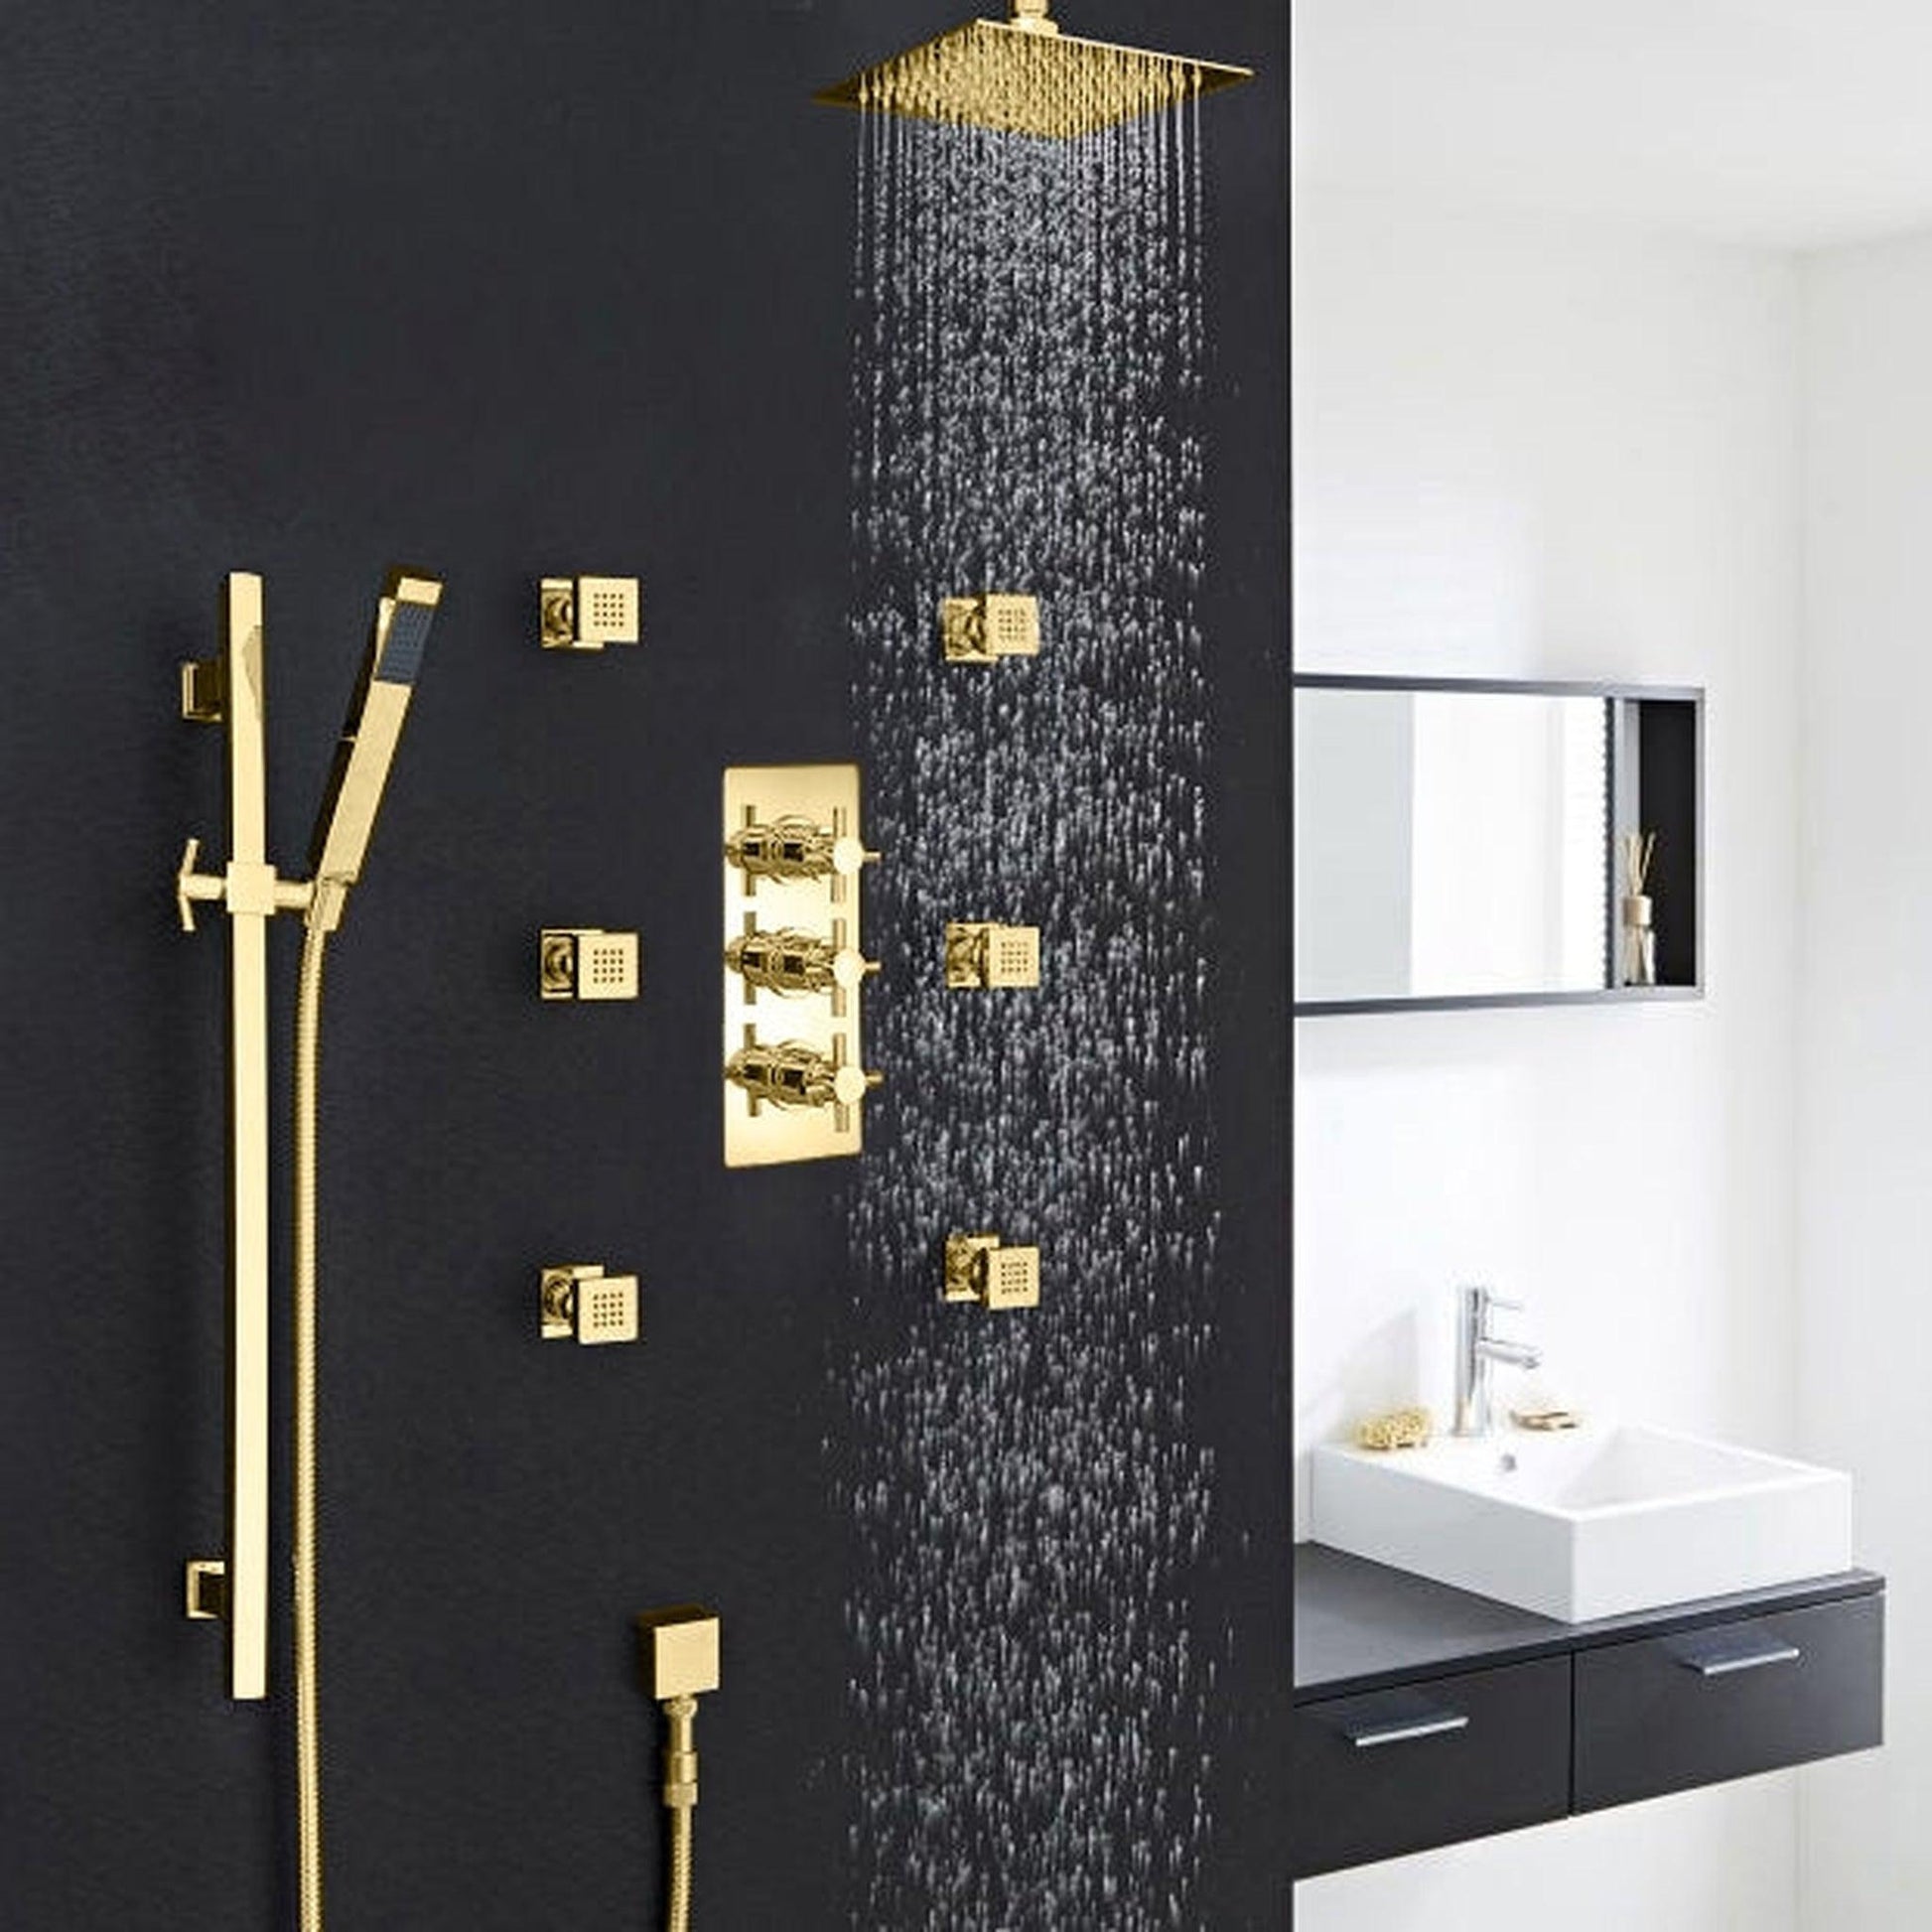 Fontana Reno 16" Gold Square Ceiling Mounted Rainfall Shower System With 6-Body Massage Jets and Hand Shower